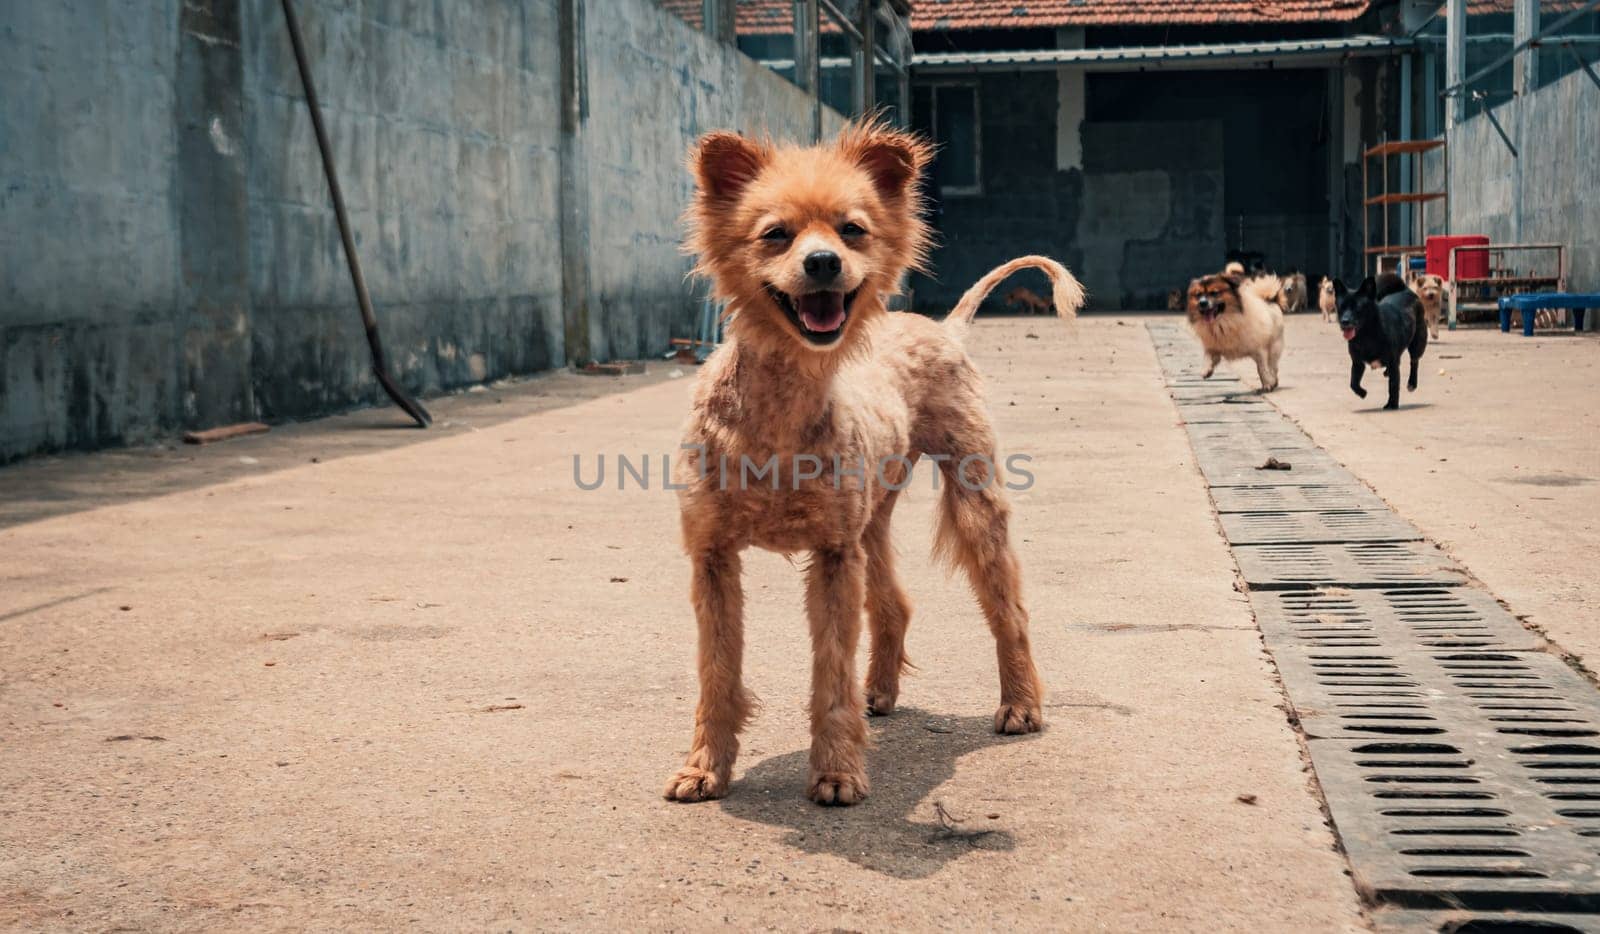 Mixed breed dog in shelter waiting to be rescued and adopted to new home. Shelter for animals concept by Busker